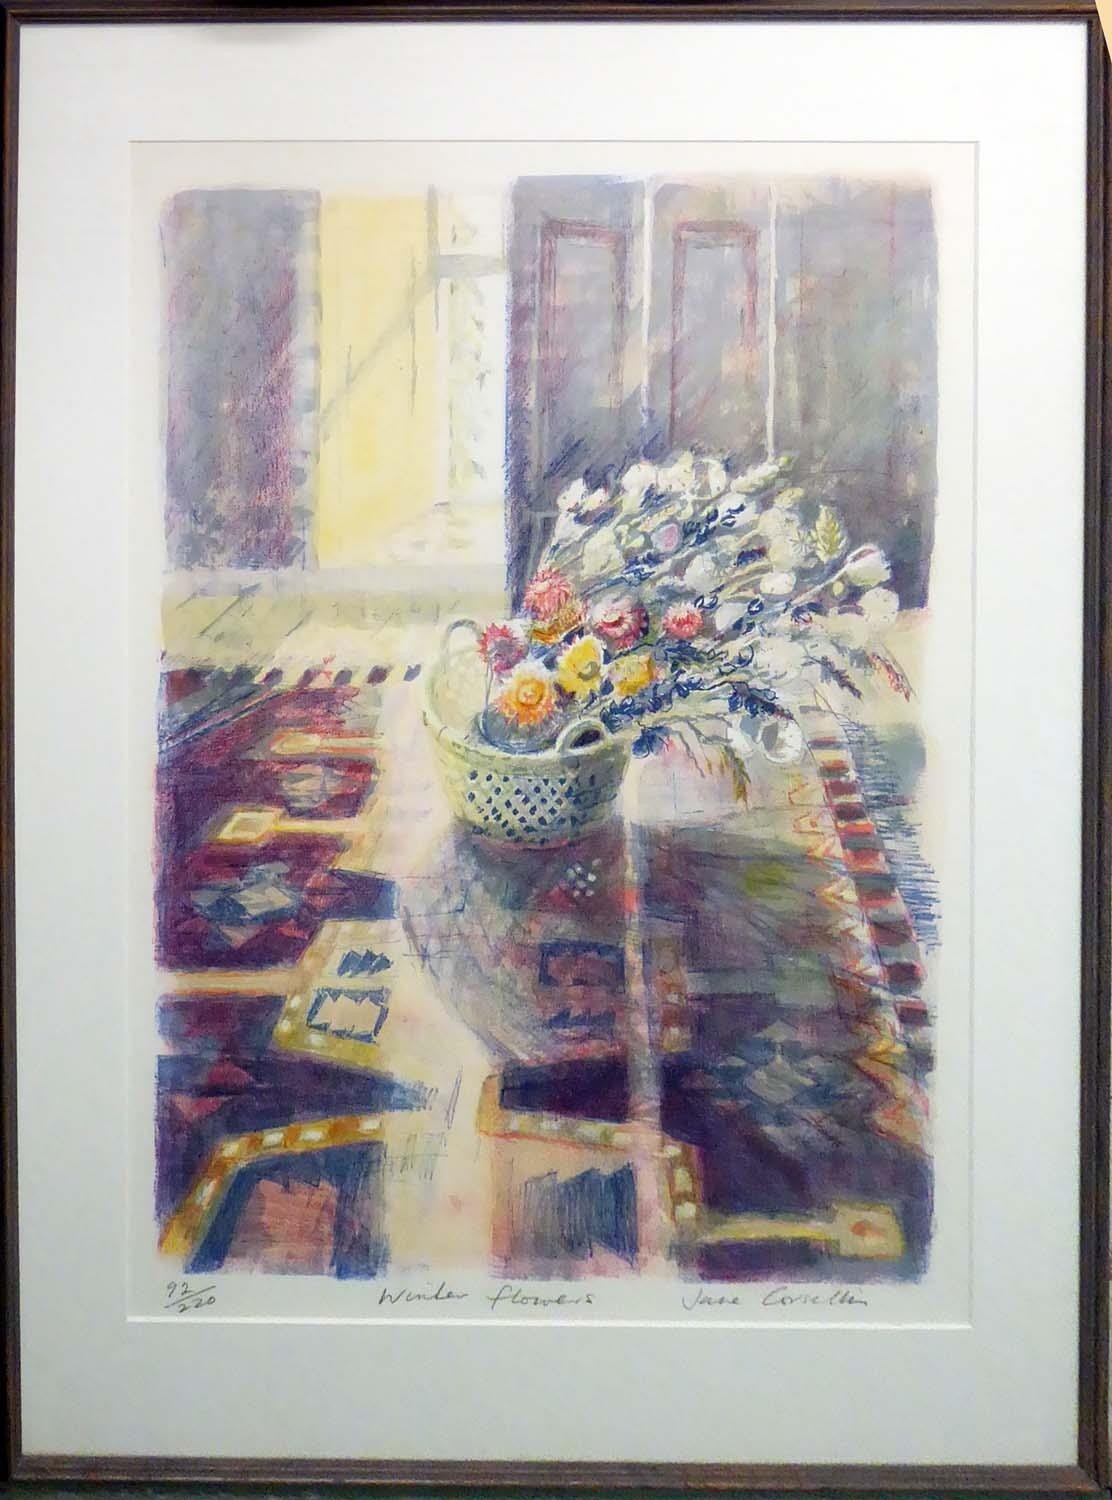 JANE CORSELLIS 'Winter Flowers', lithograph, signed, numbered and titled in pencil, framed, 91cm x